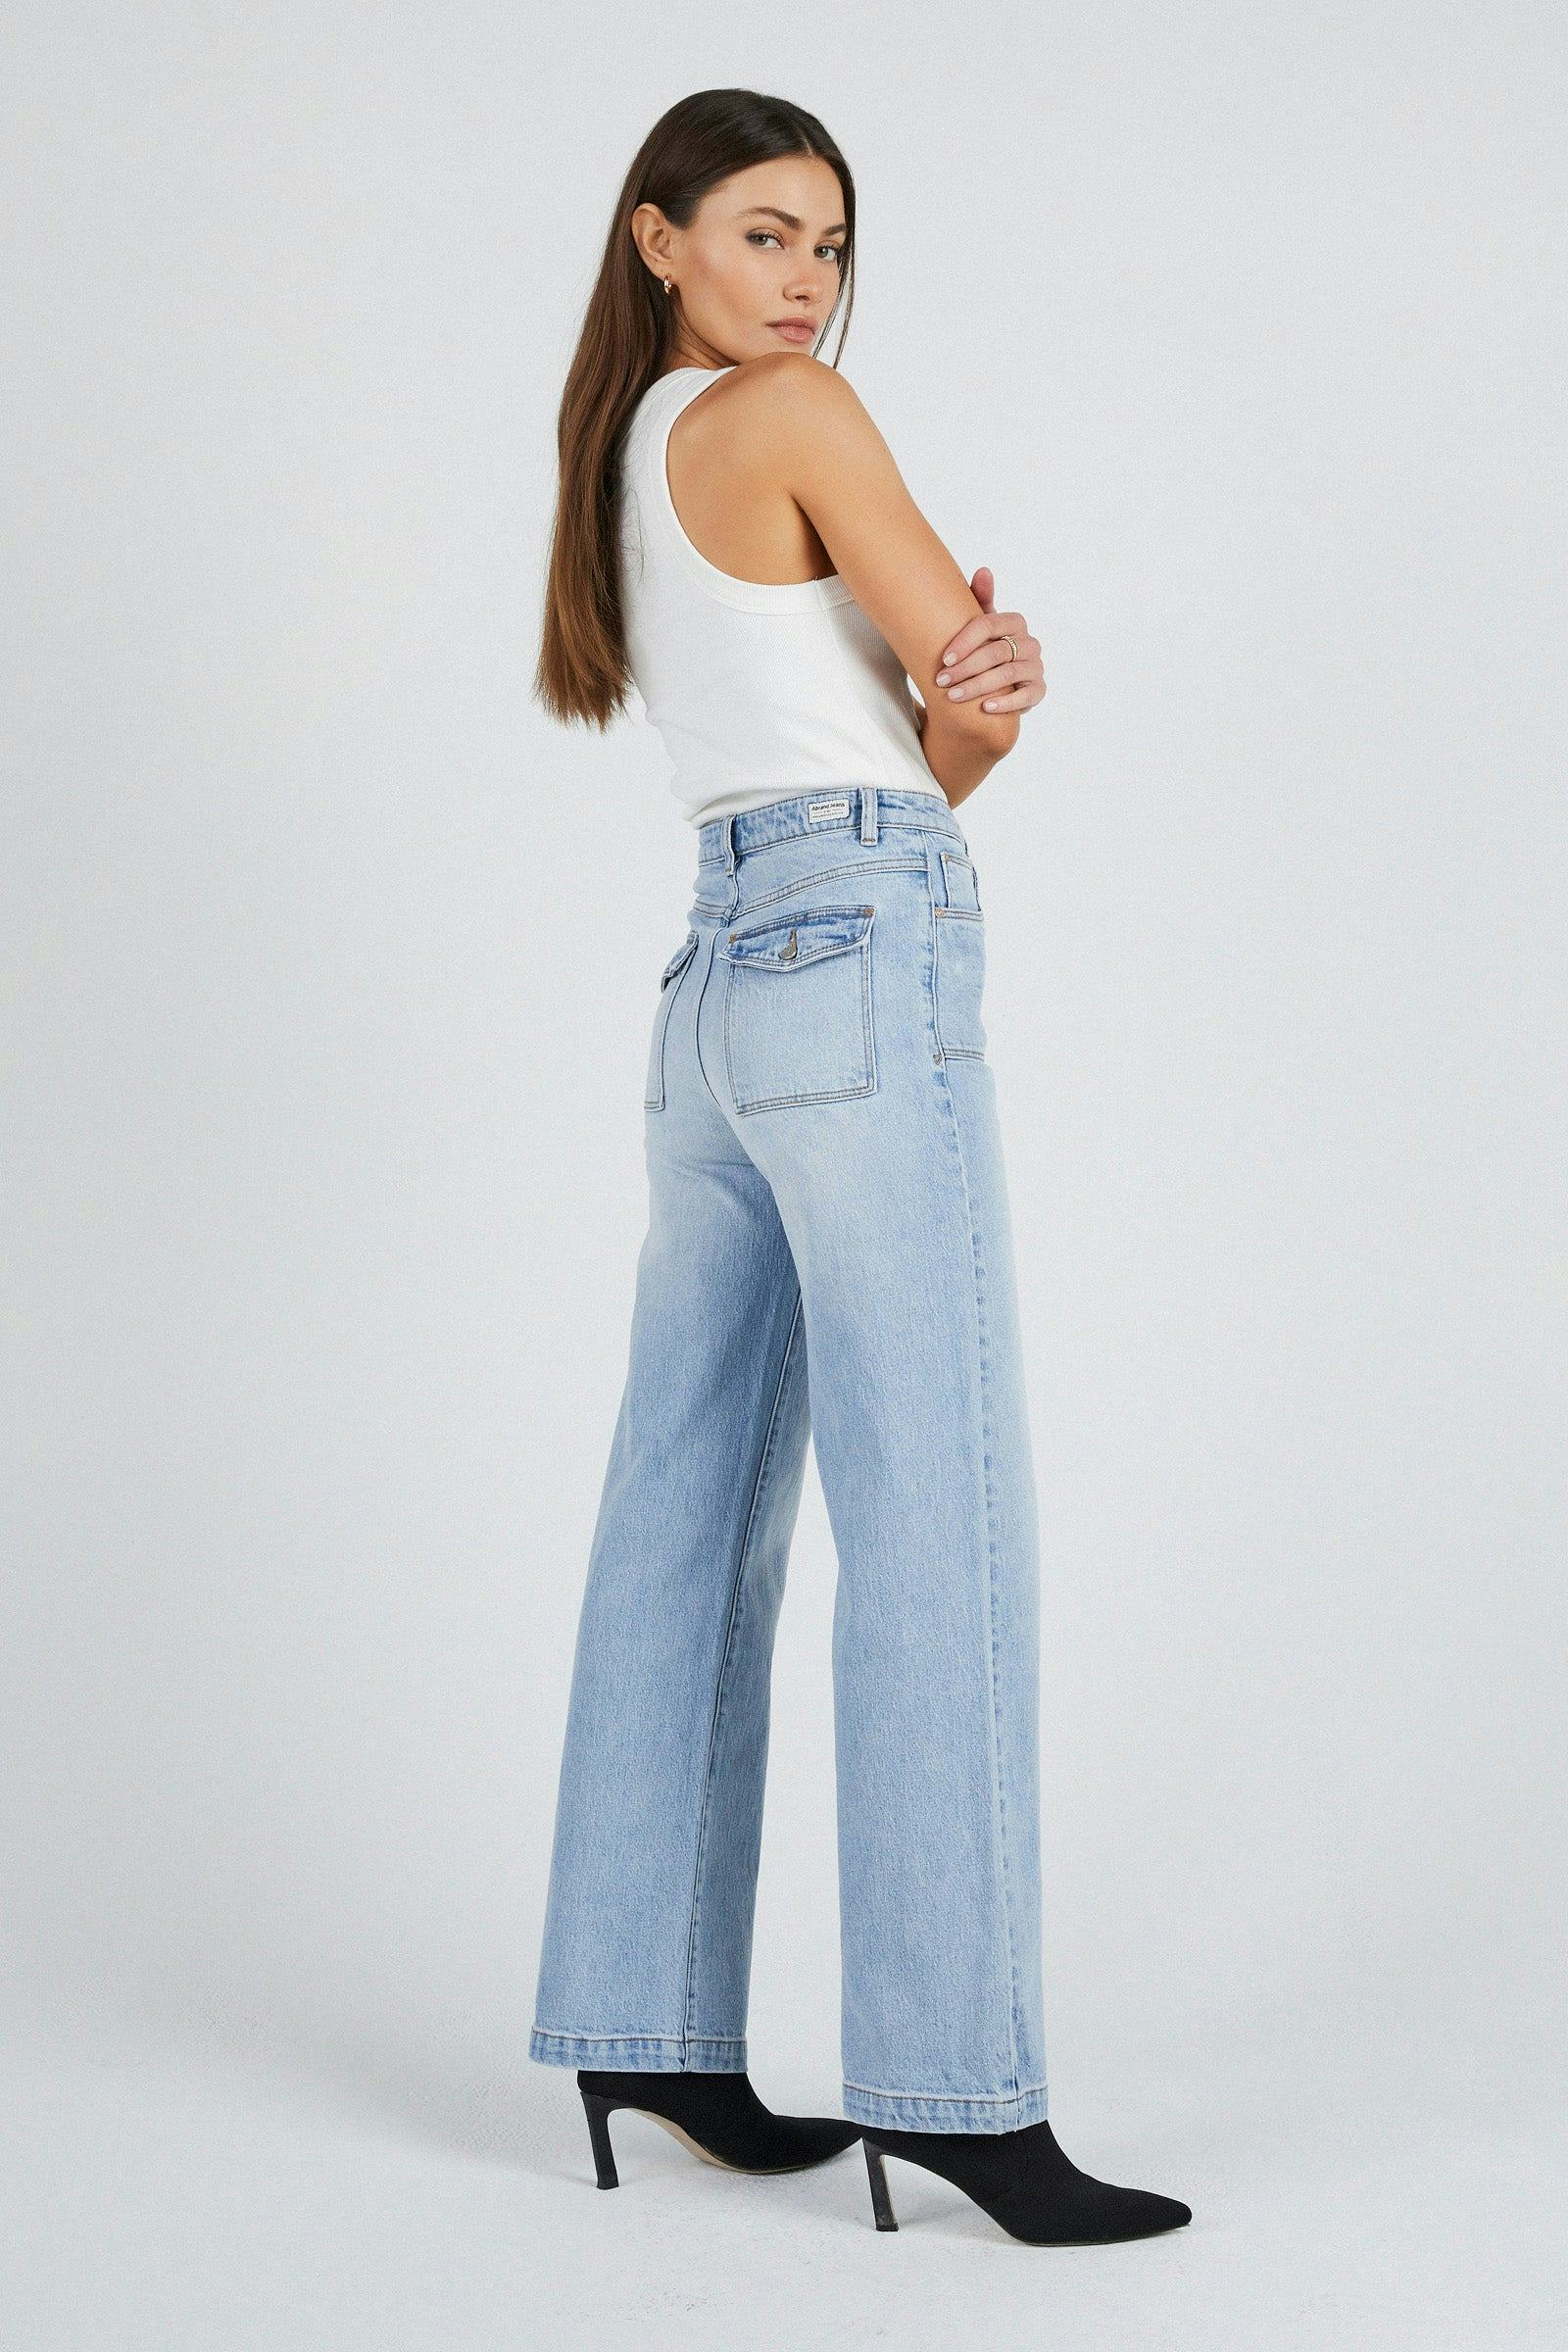 Buy 94 High & Wide Sofie Recycled Online | Abrand Jeans